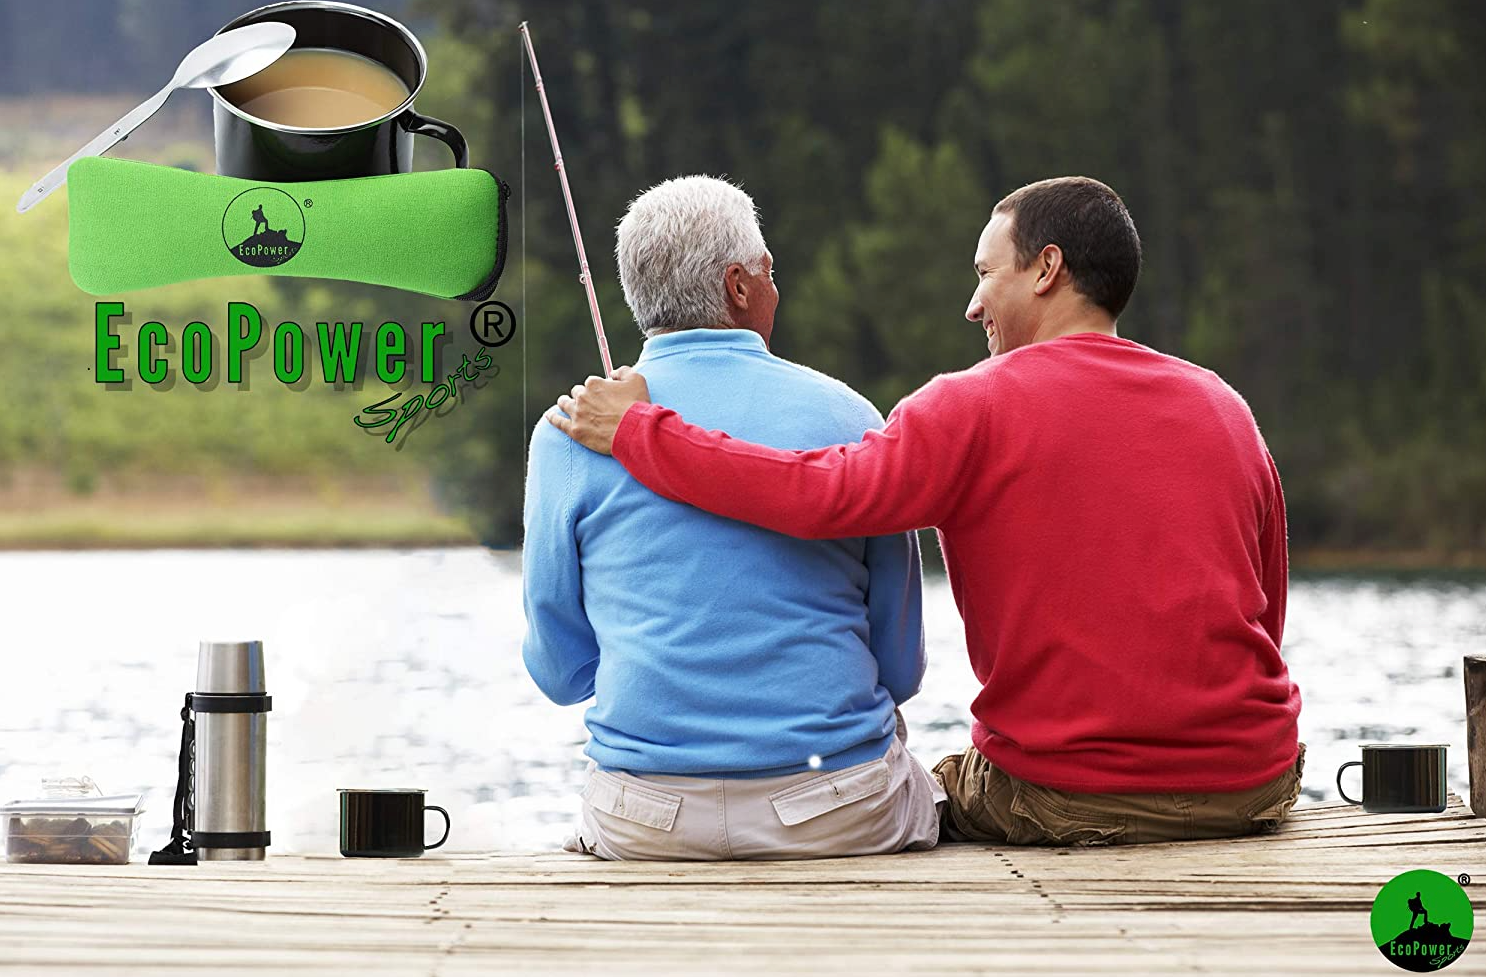 ecopower sports picnic set for fishing, camping and BBQ